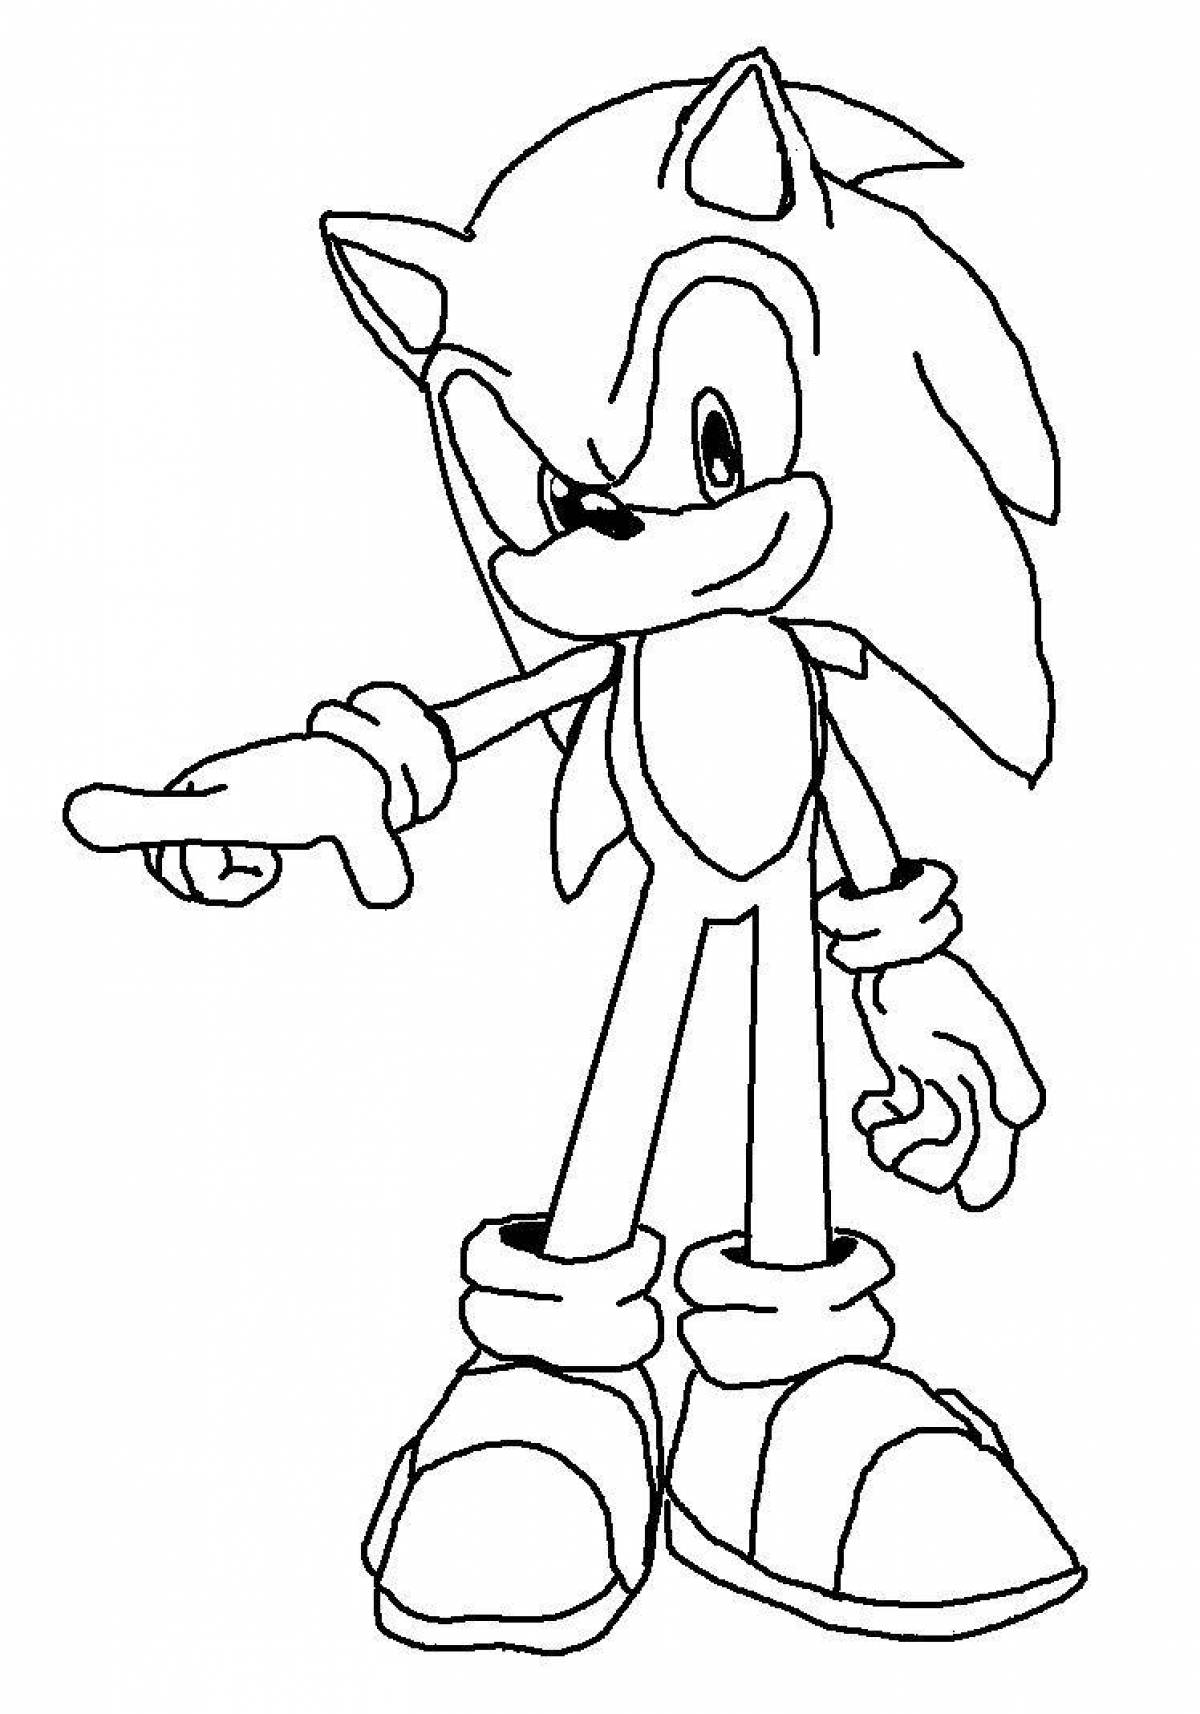 Attractive sonic coloring book for boys